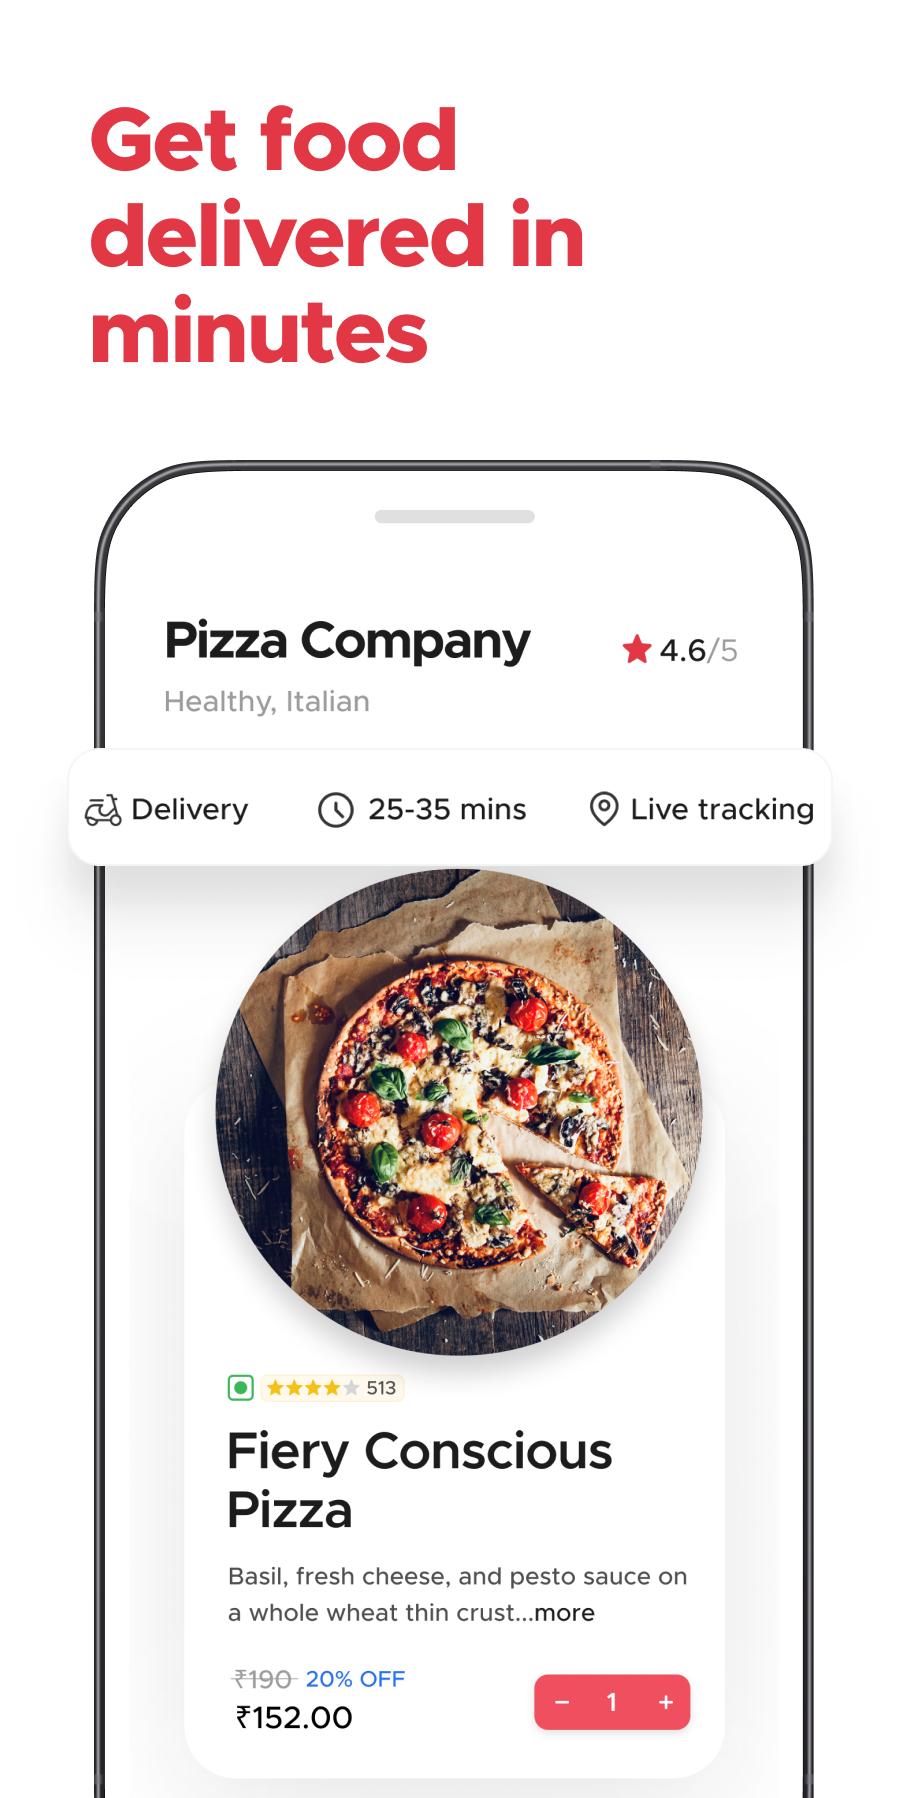 Zomato - Online Food Delivery & Restaurant Reviews for Android - APK